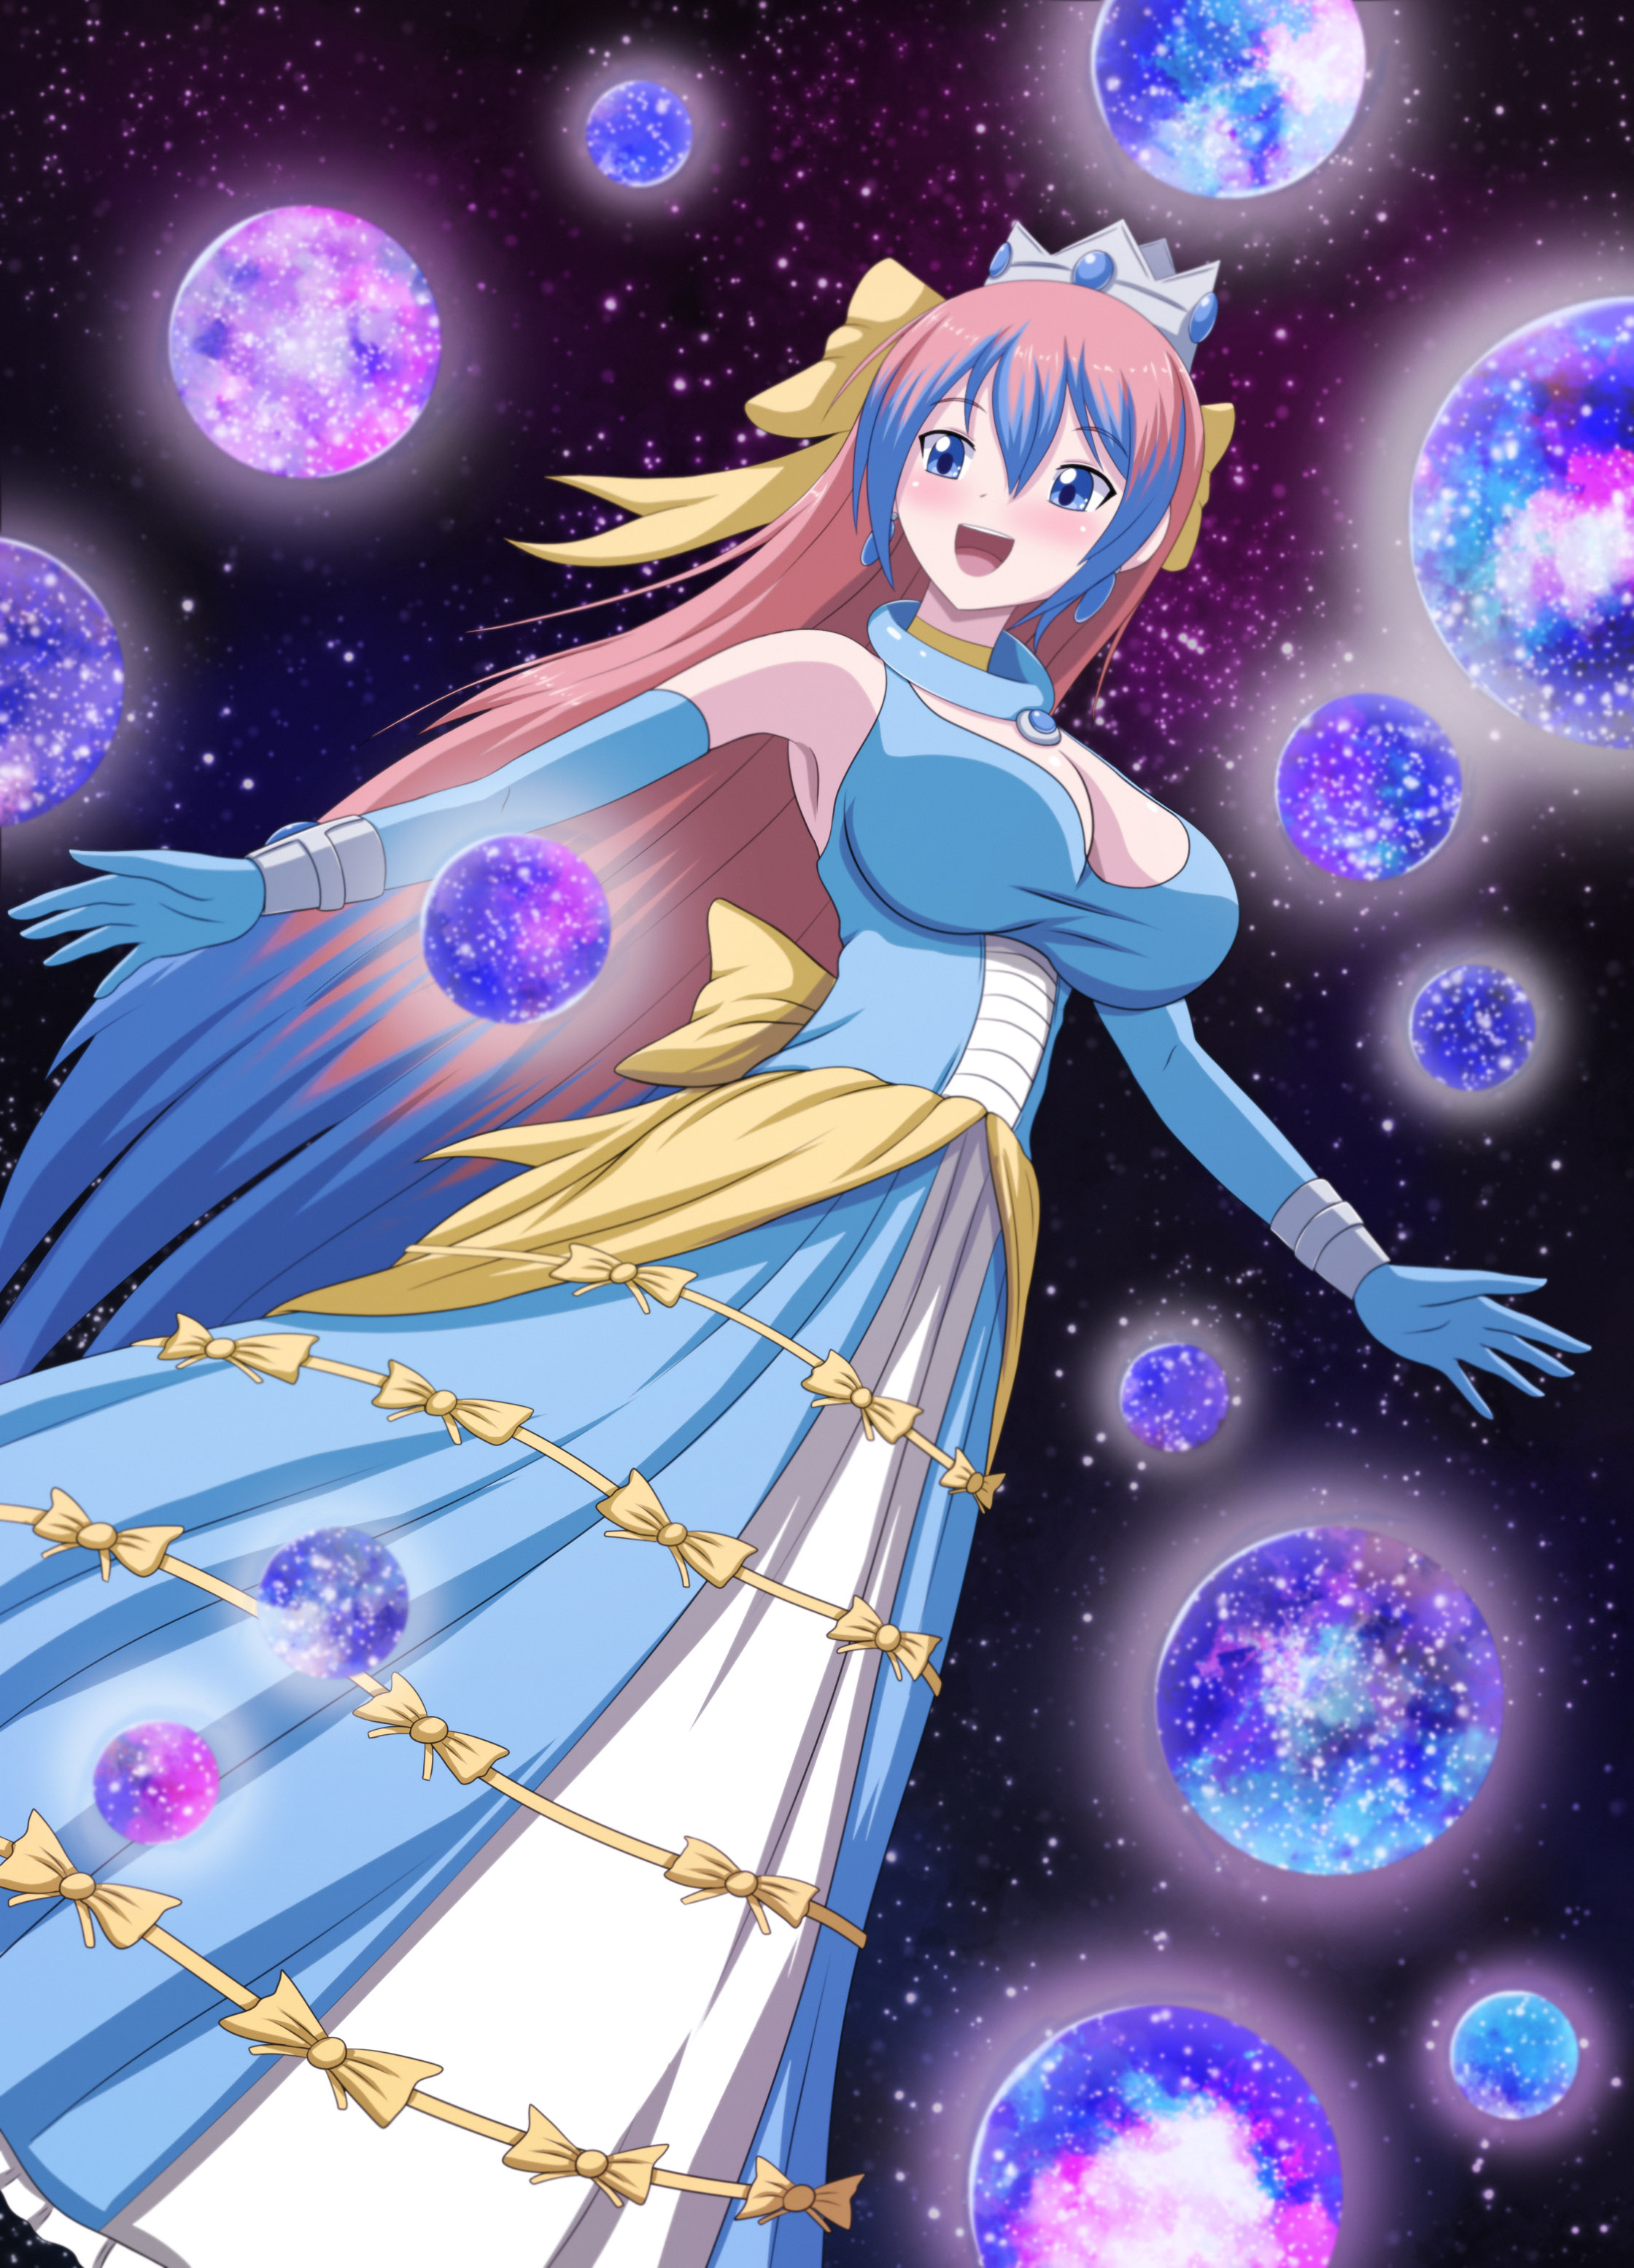 Staris The Protector Of Multiverses By Thedaibijin On Deviantart